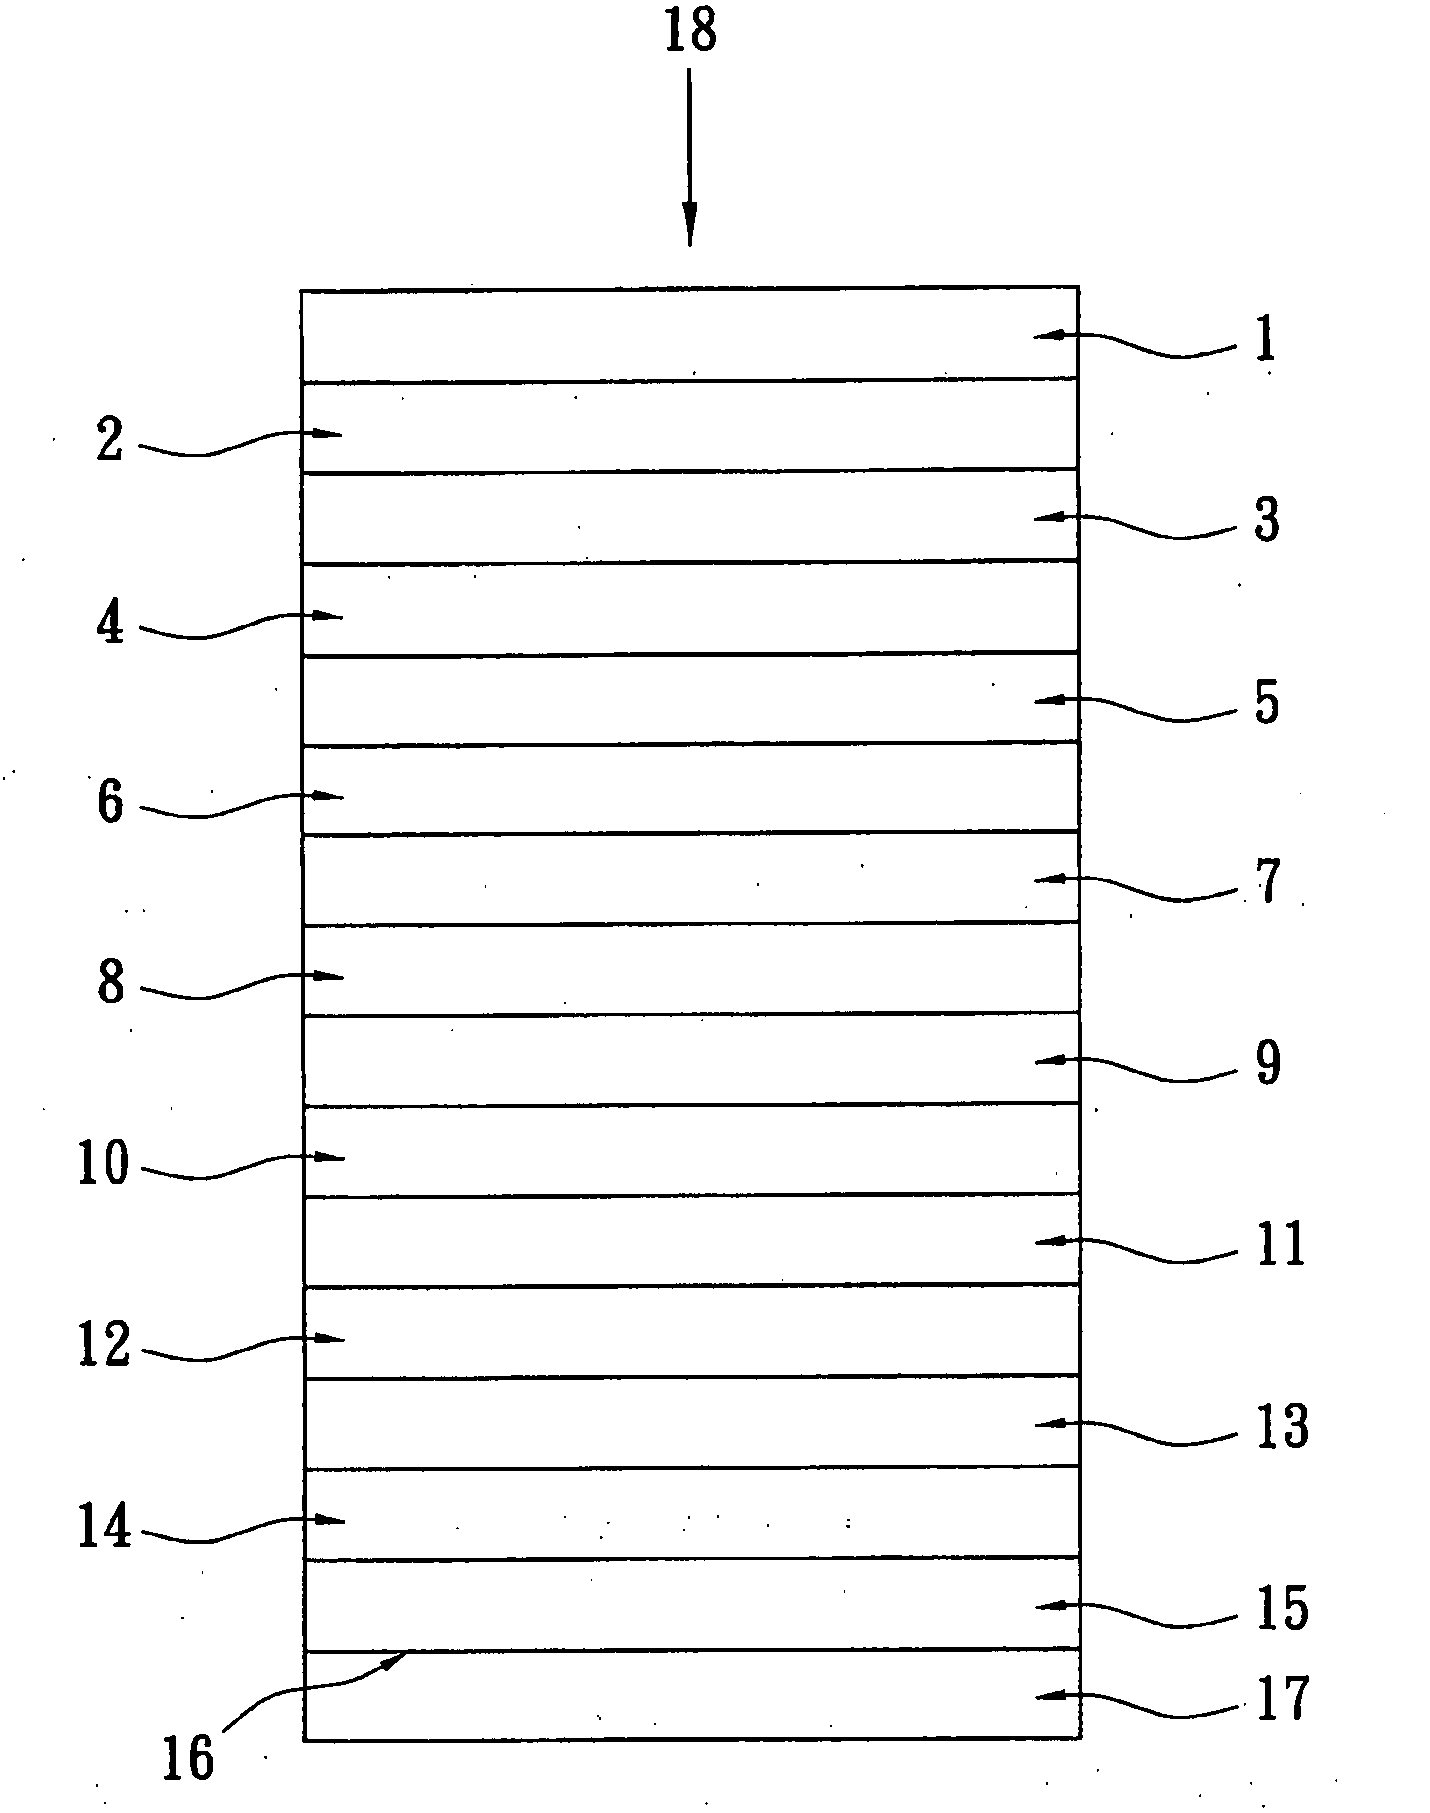 Anti-reflection coating with low resistivity function and transparent conductive coating as outermost layer